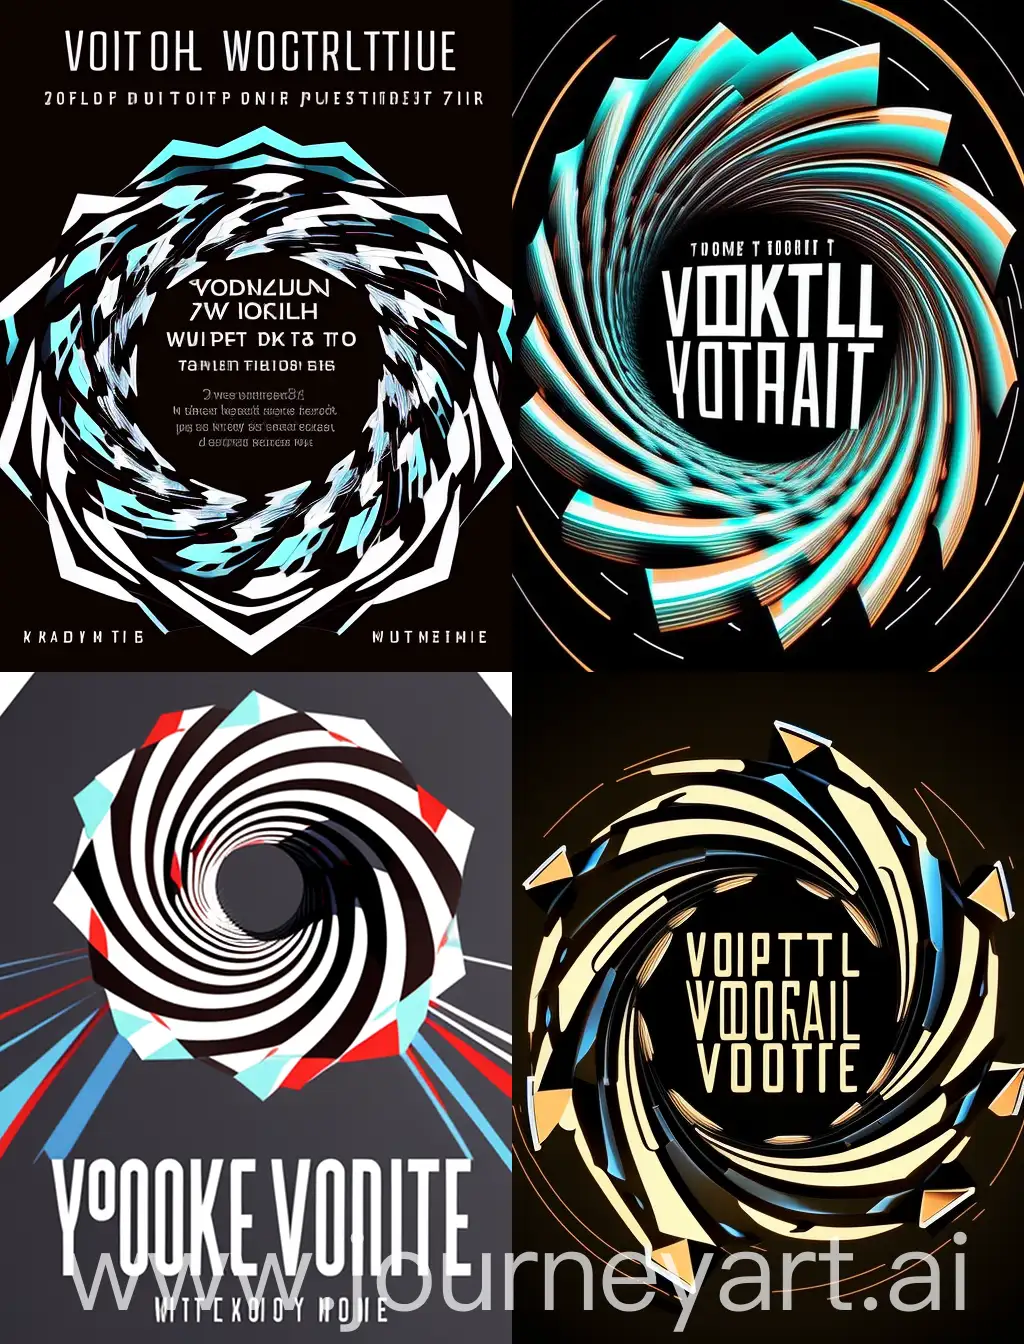 Project title: “Digital Vortex”. Project Summary: Create an animation for the festival logo, which is an abstract digital vortex with an illusion of movement. The vortex should symbolize the different areas of the festival such as Game Animation, Motion Design, AR, Interactive Technology and 3D. Main requirements: The logo should be abstract and modern, with a visual illusion of movement. The vortex should be composed of different elements representing each of the festival destinations. The animation should be fluid and dynamic to convey a sense of interconnectedness and dynamics between the directions. The logo should be technological, reflecting an atmosphere of digital art and IT-ness. Additional guidelines: You can look to ideas of swirl, motion effects and intertwining digital elements for animation inspiration. Try to emphasize the harmony and interconnectedness between the different strands of the festival. Use bright colors to make the logo attractive and memorable. Delivery format: Vector file with animated logo in GIF or video format. Have fun creating your logo! Please submit an animation that reflects your vision of the Digital Vortex for the Color Vortex Festival.